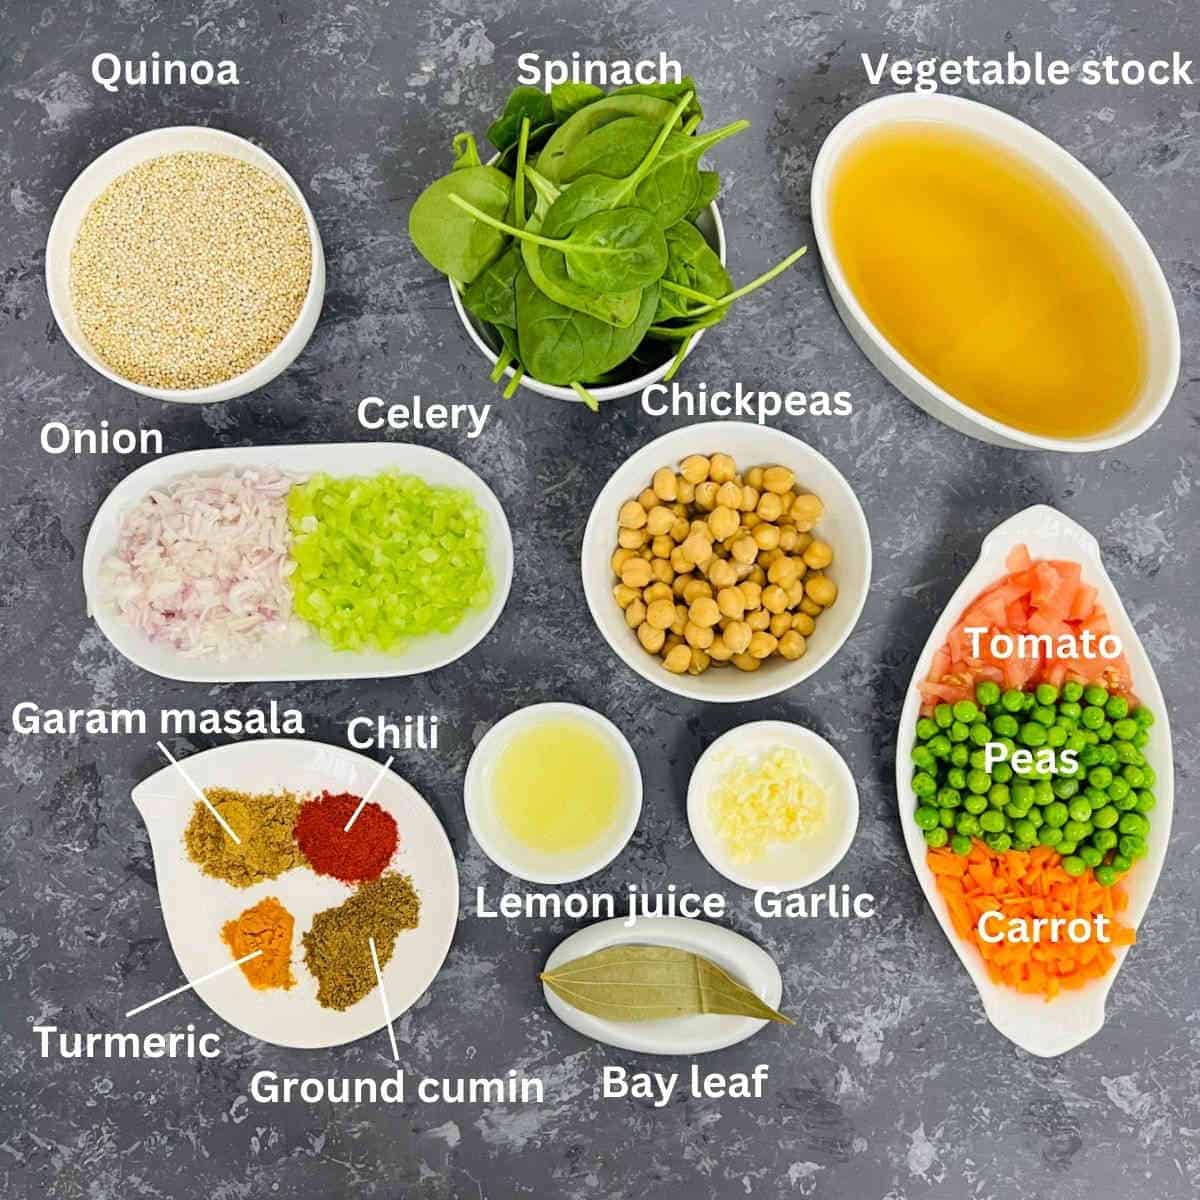 quinoa soup ingredients with labels.